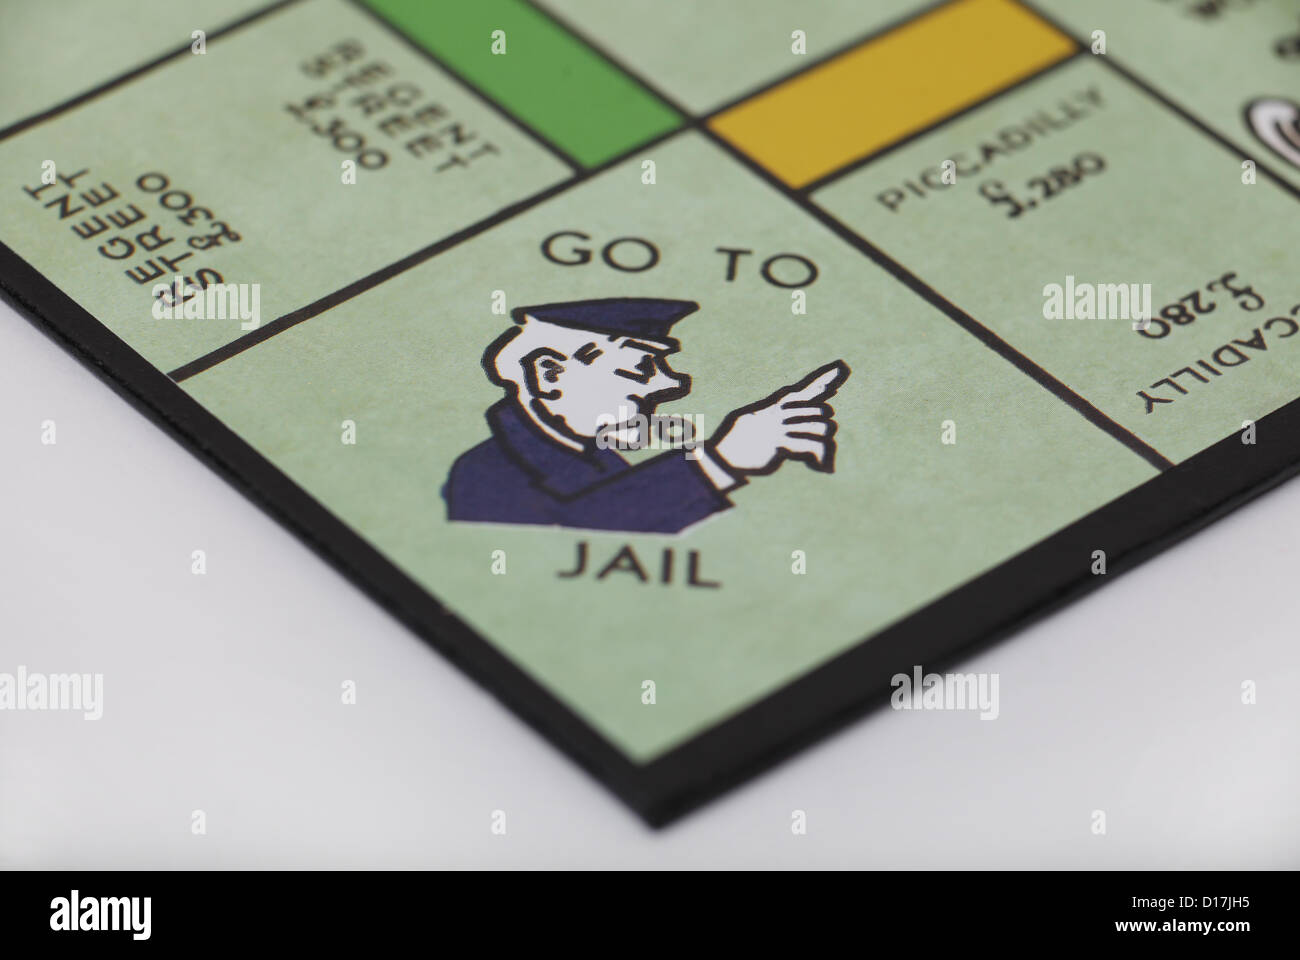 Go To Jail square on a Monopoly board. Stock Photo